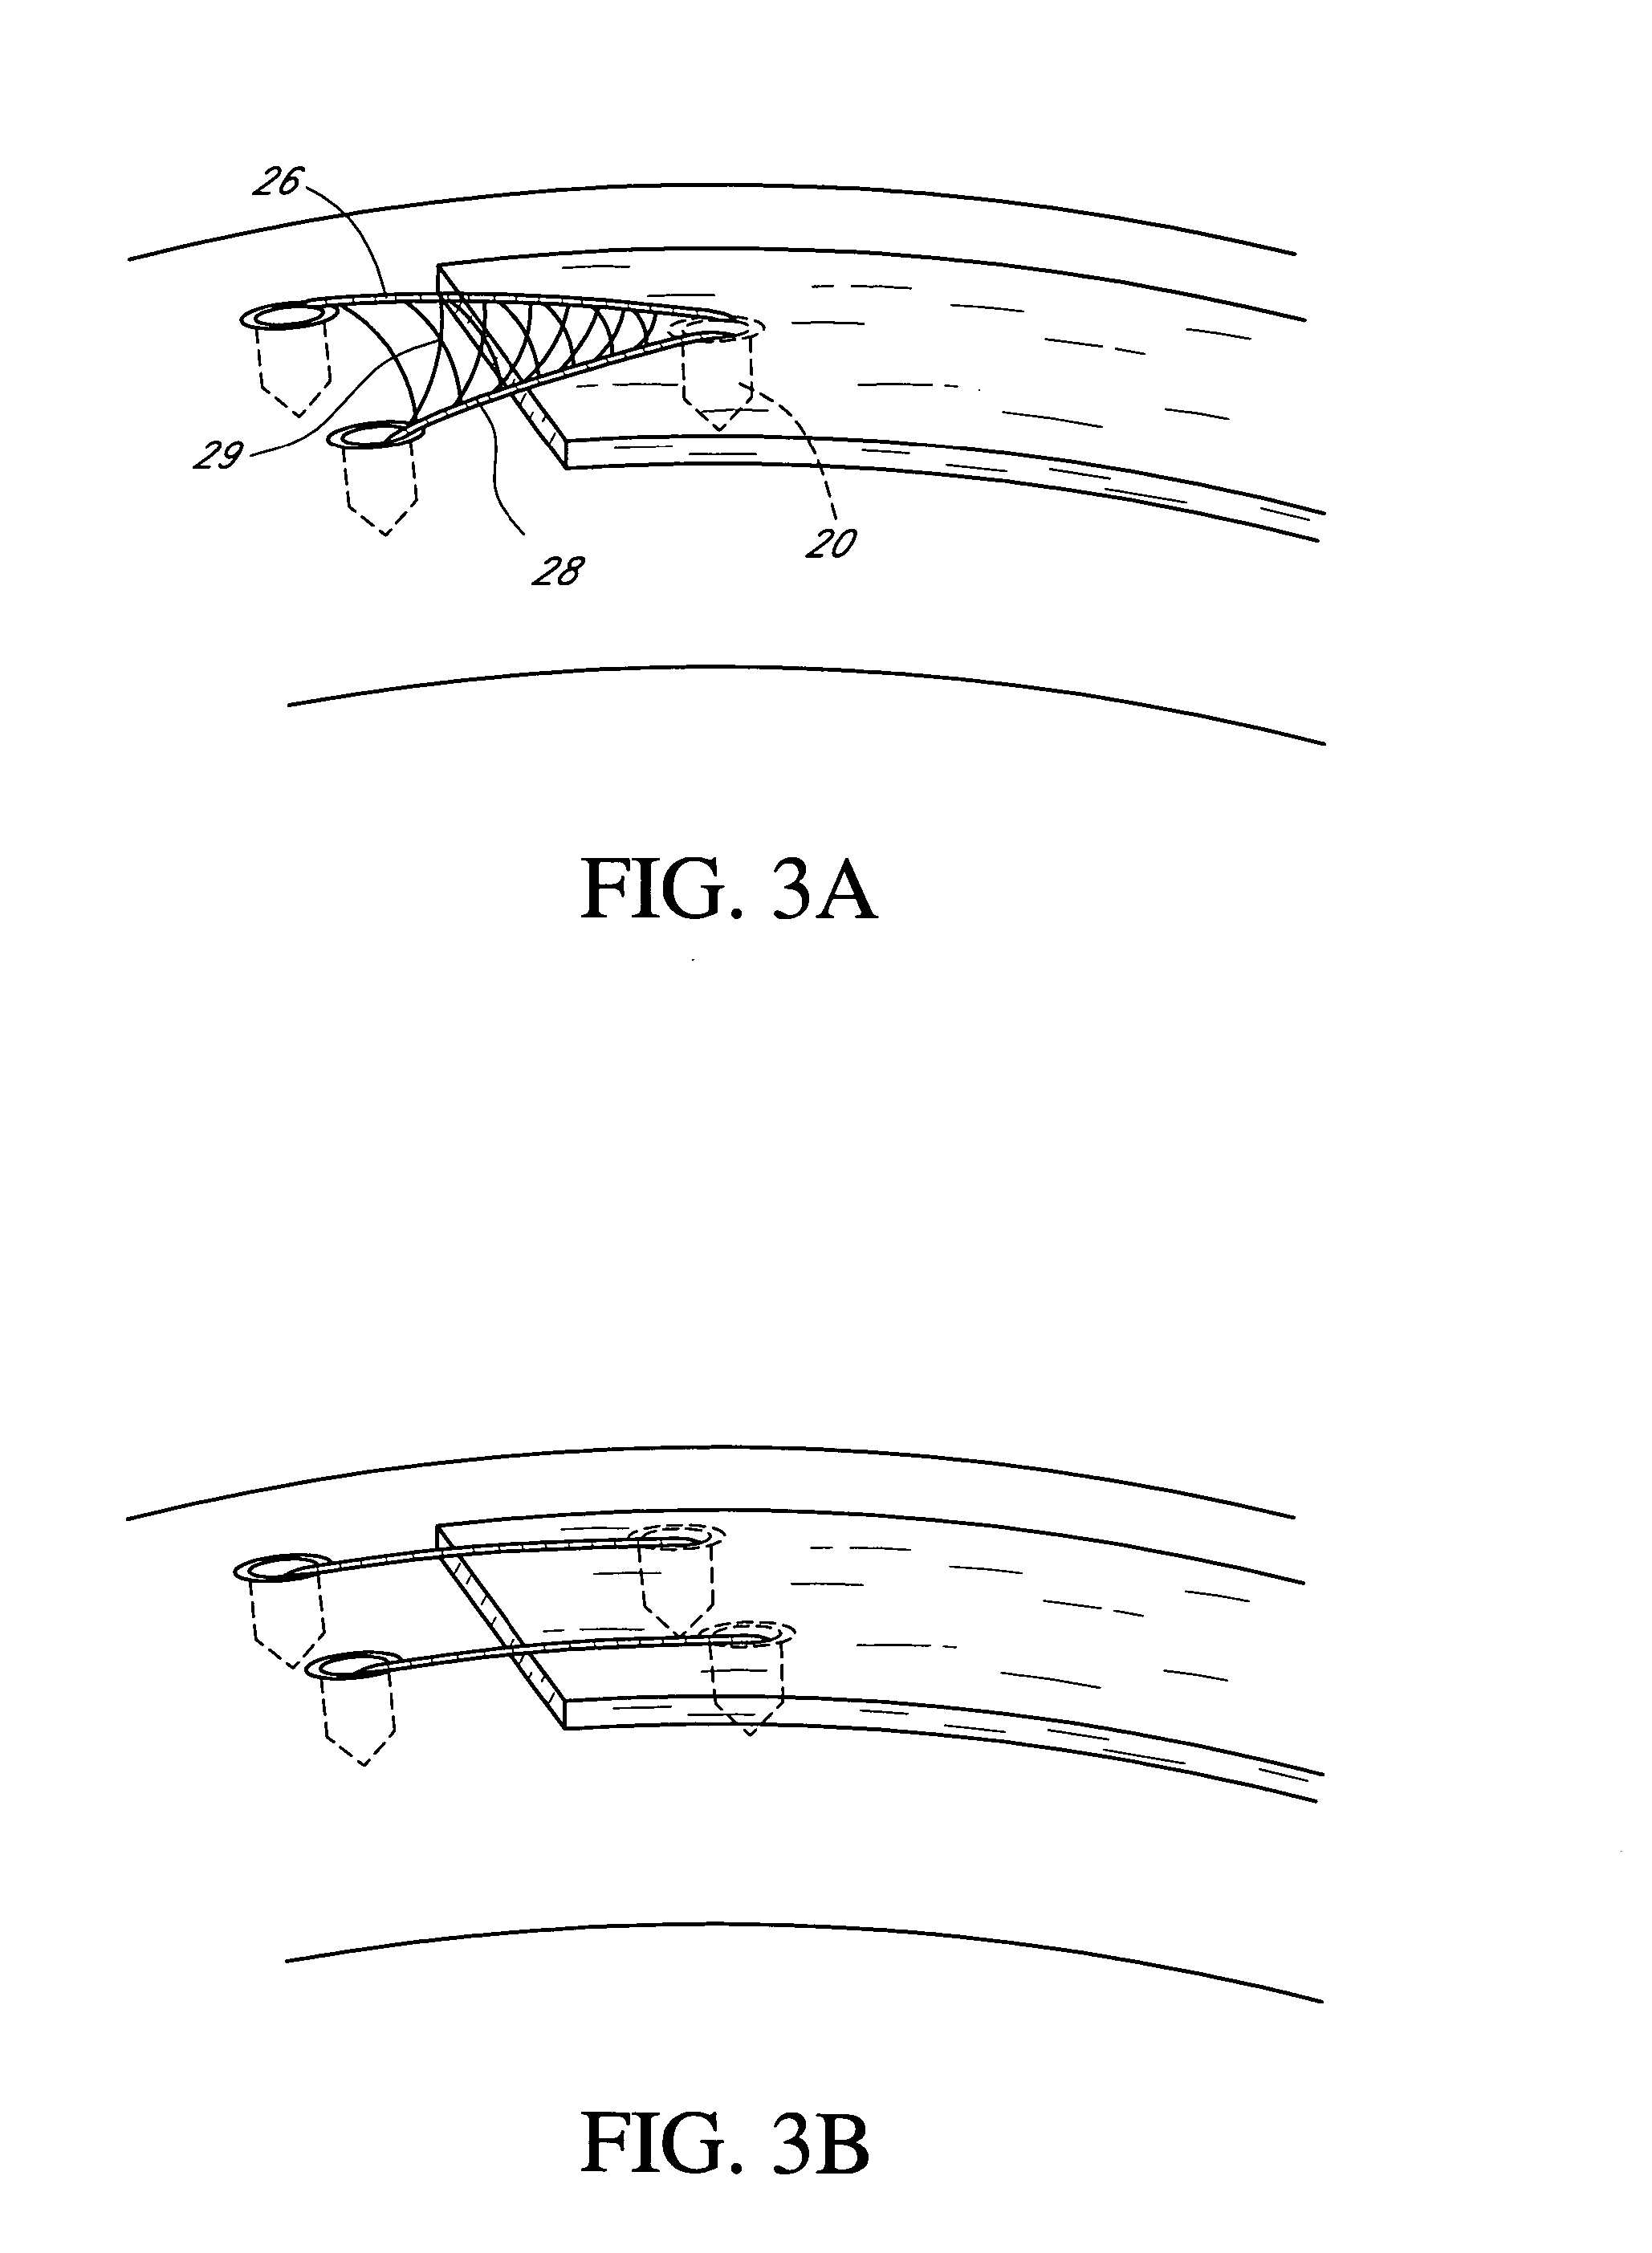 System and method for attaching soft tissue to bone